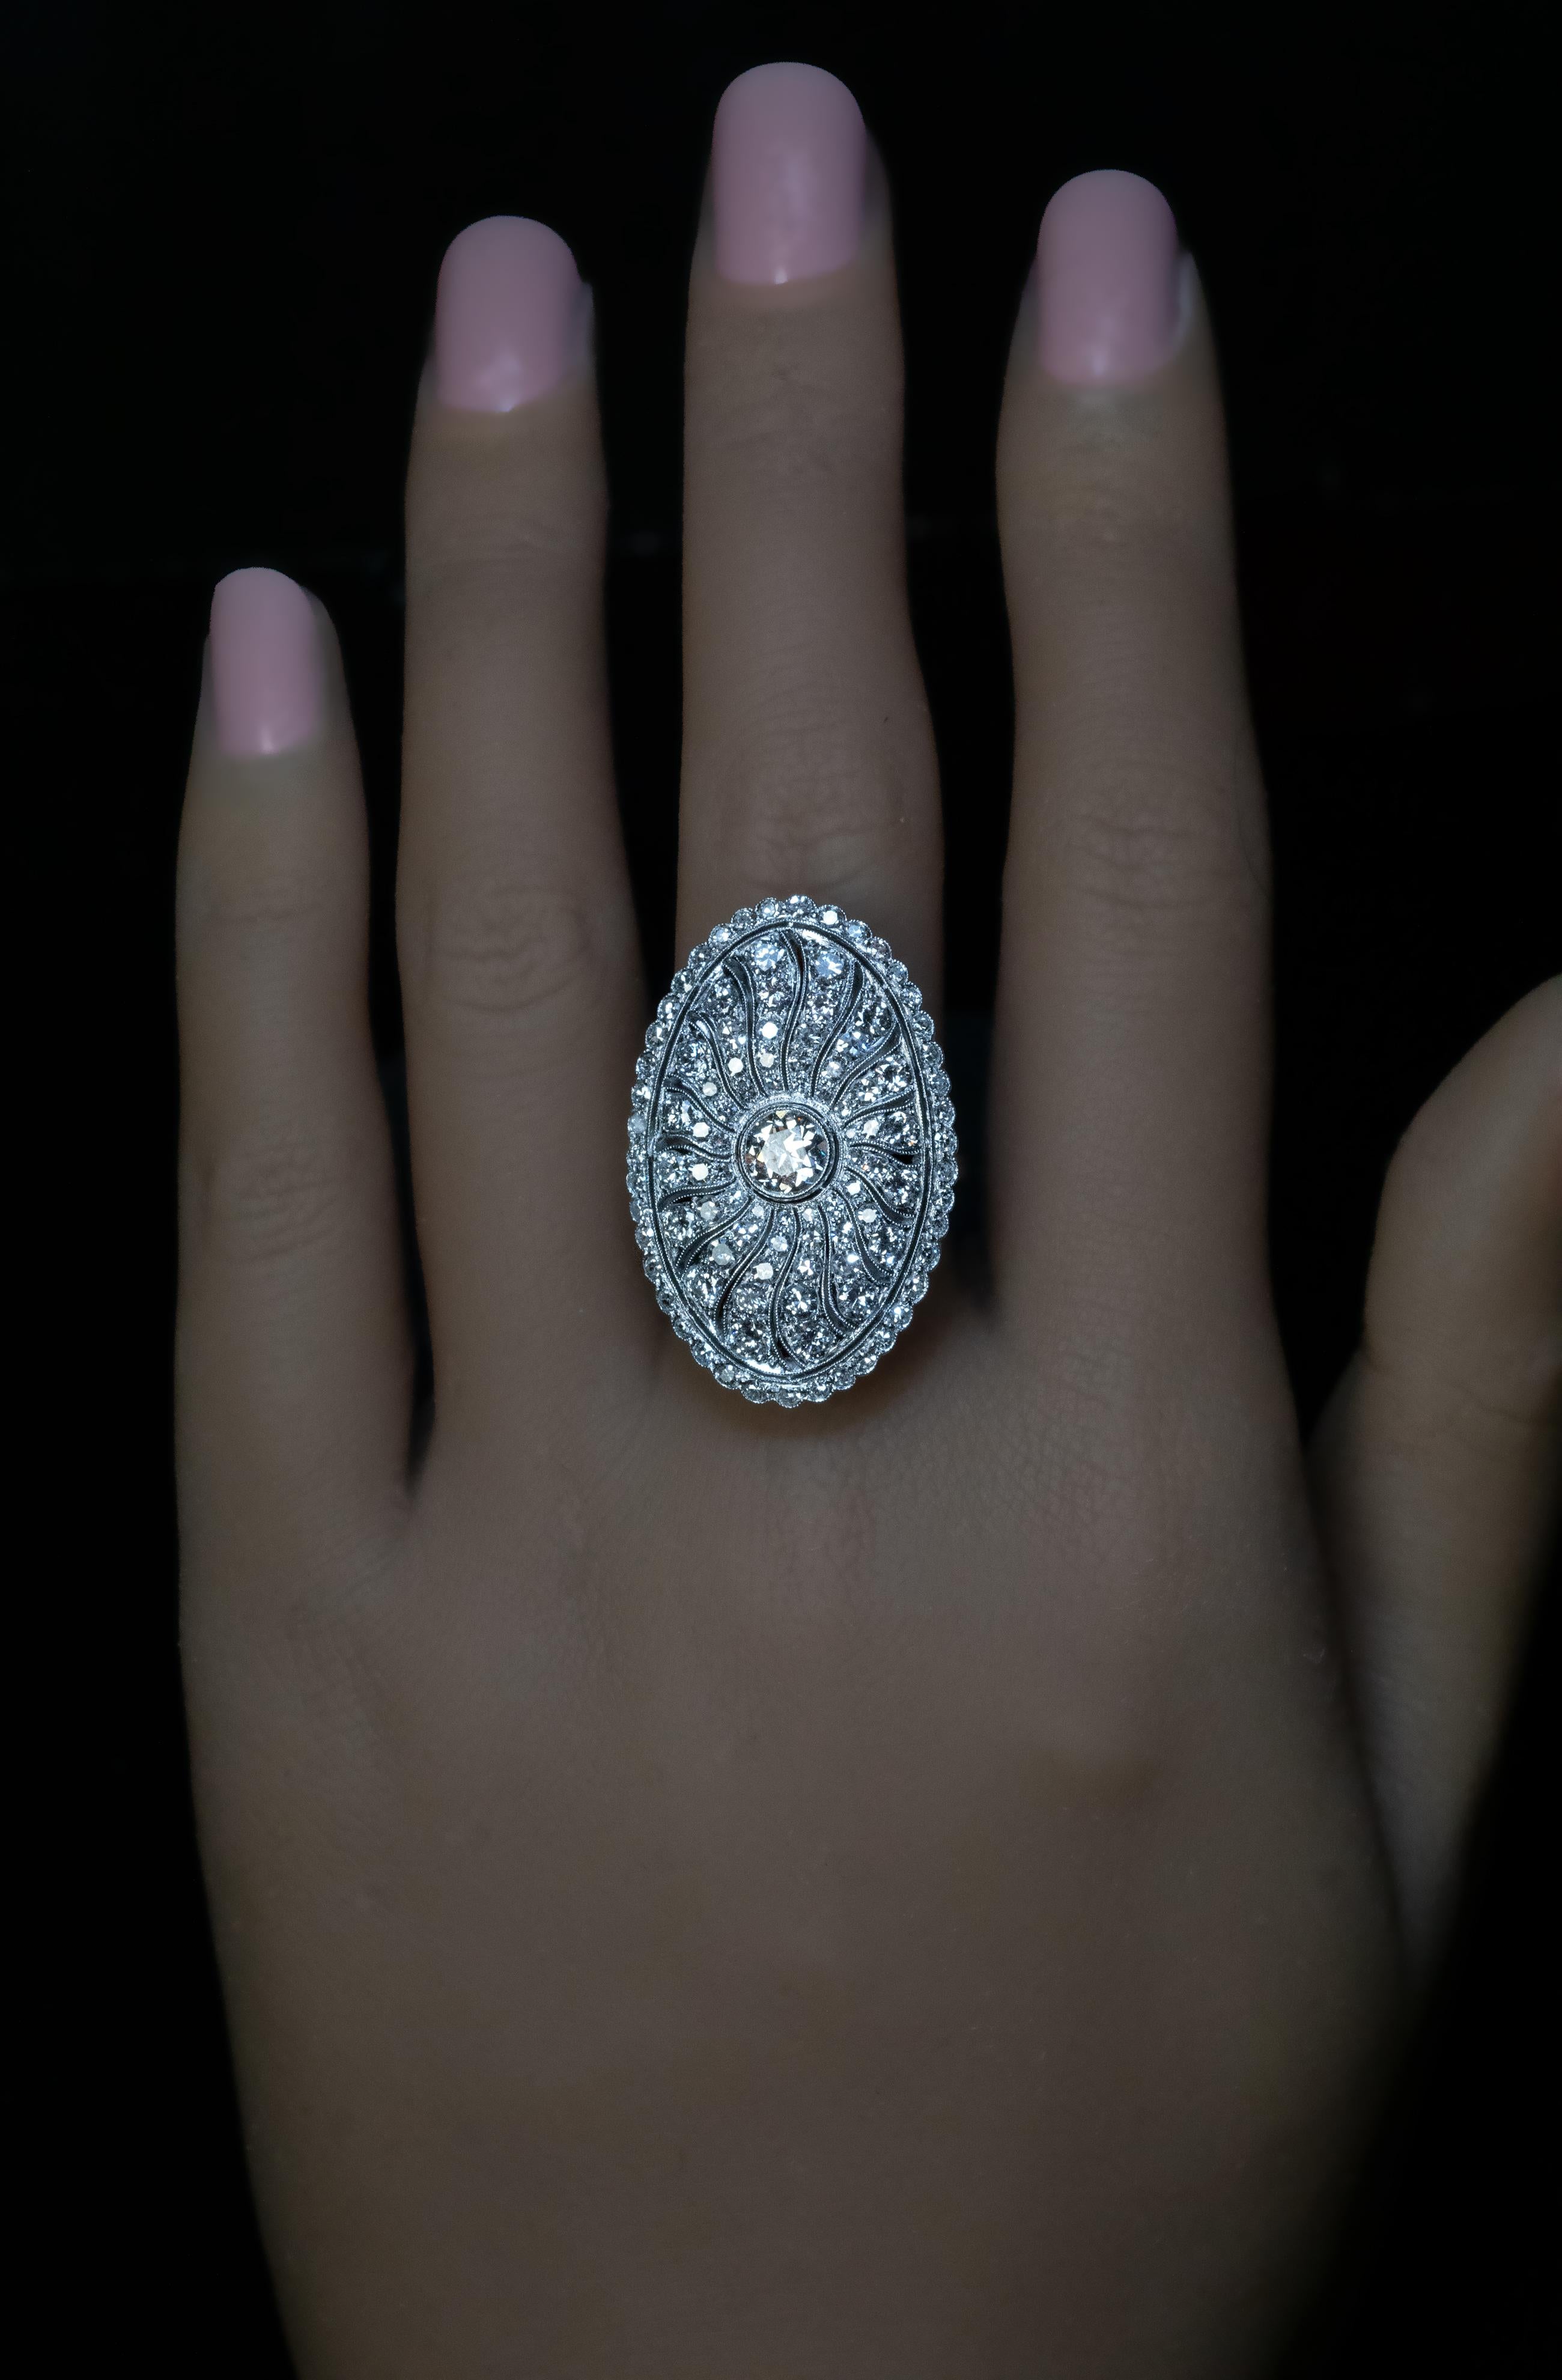 1920s
This openwork sunburst motif ring from the Art Deco era is superbly handcrafted in platinum (front) and 14K white gold (back). The ring is centered with an Old European cut diamond (J color, SI1 clarity, approximately 0.60 ct). The platinum